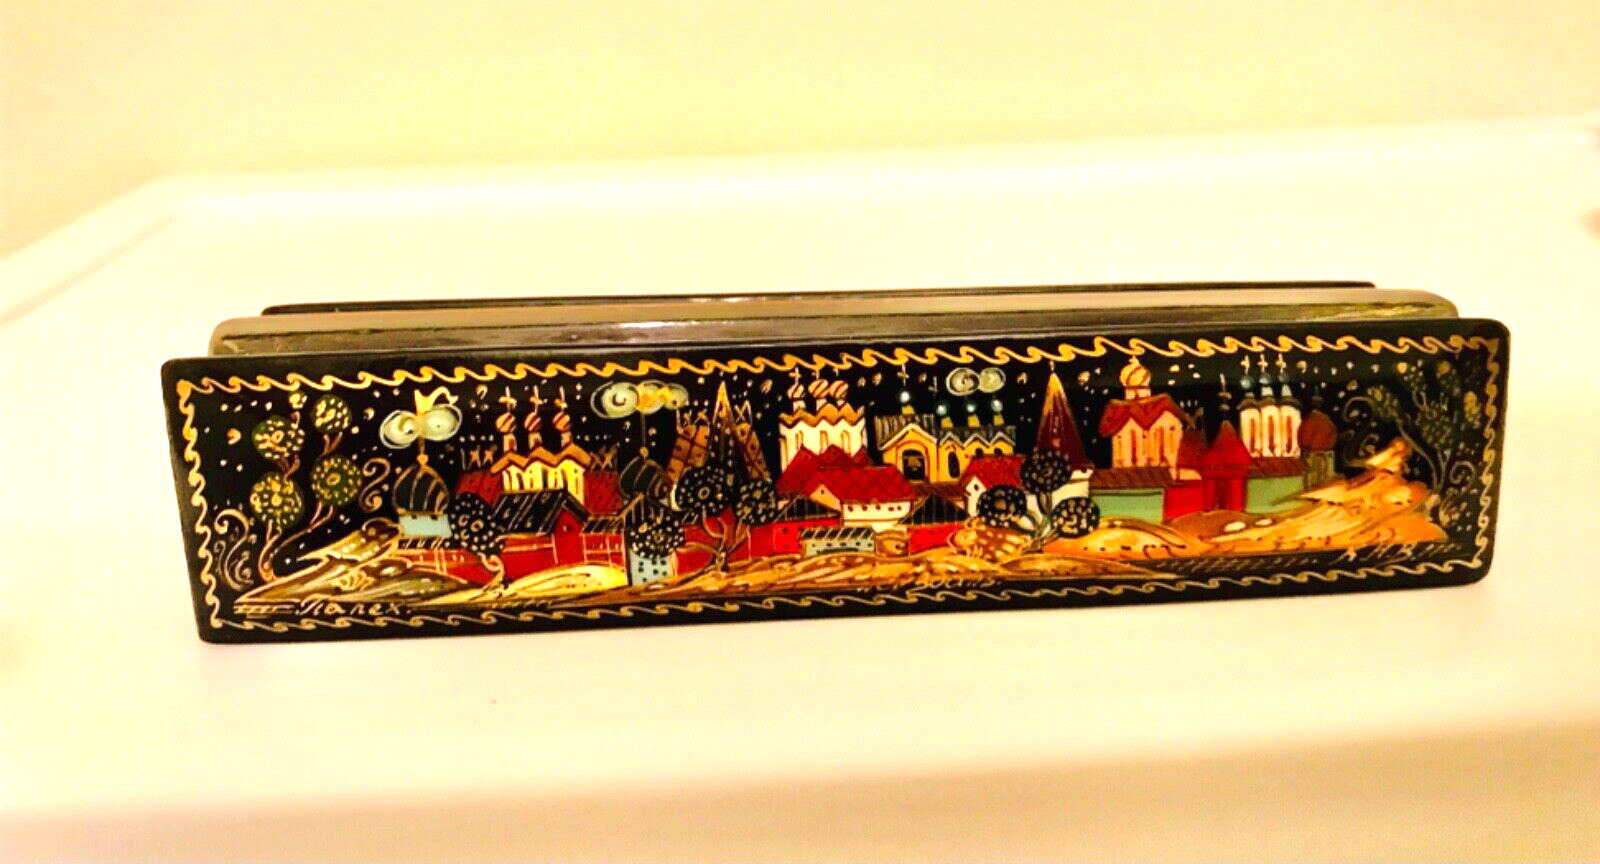 🔥LOOK🔥 NEW GENUINE PALEKH SUZDAL RUSSIAN LACQUER BOX LONG HAND PAINTED SIGNED